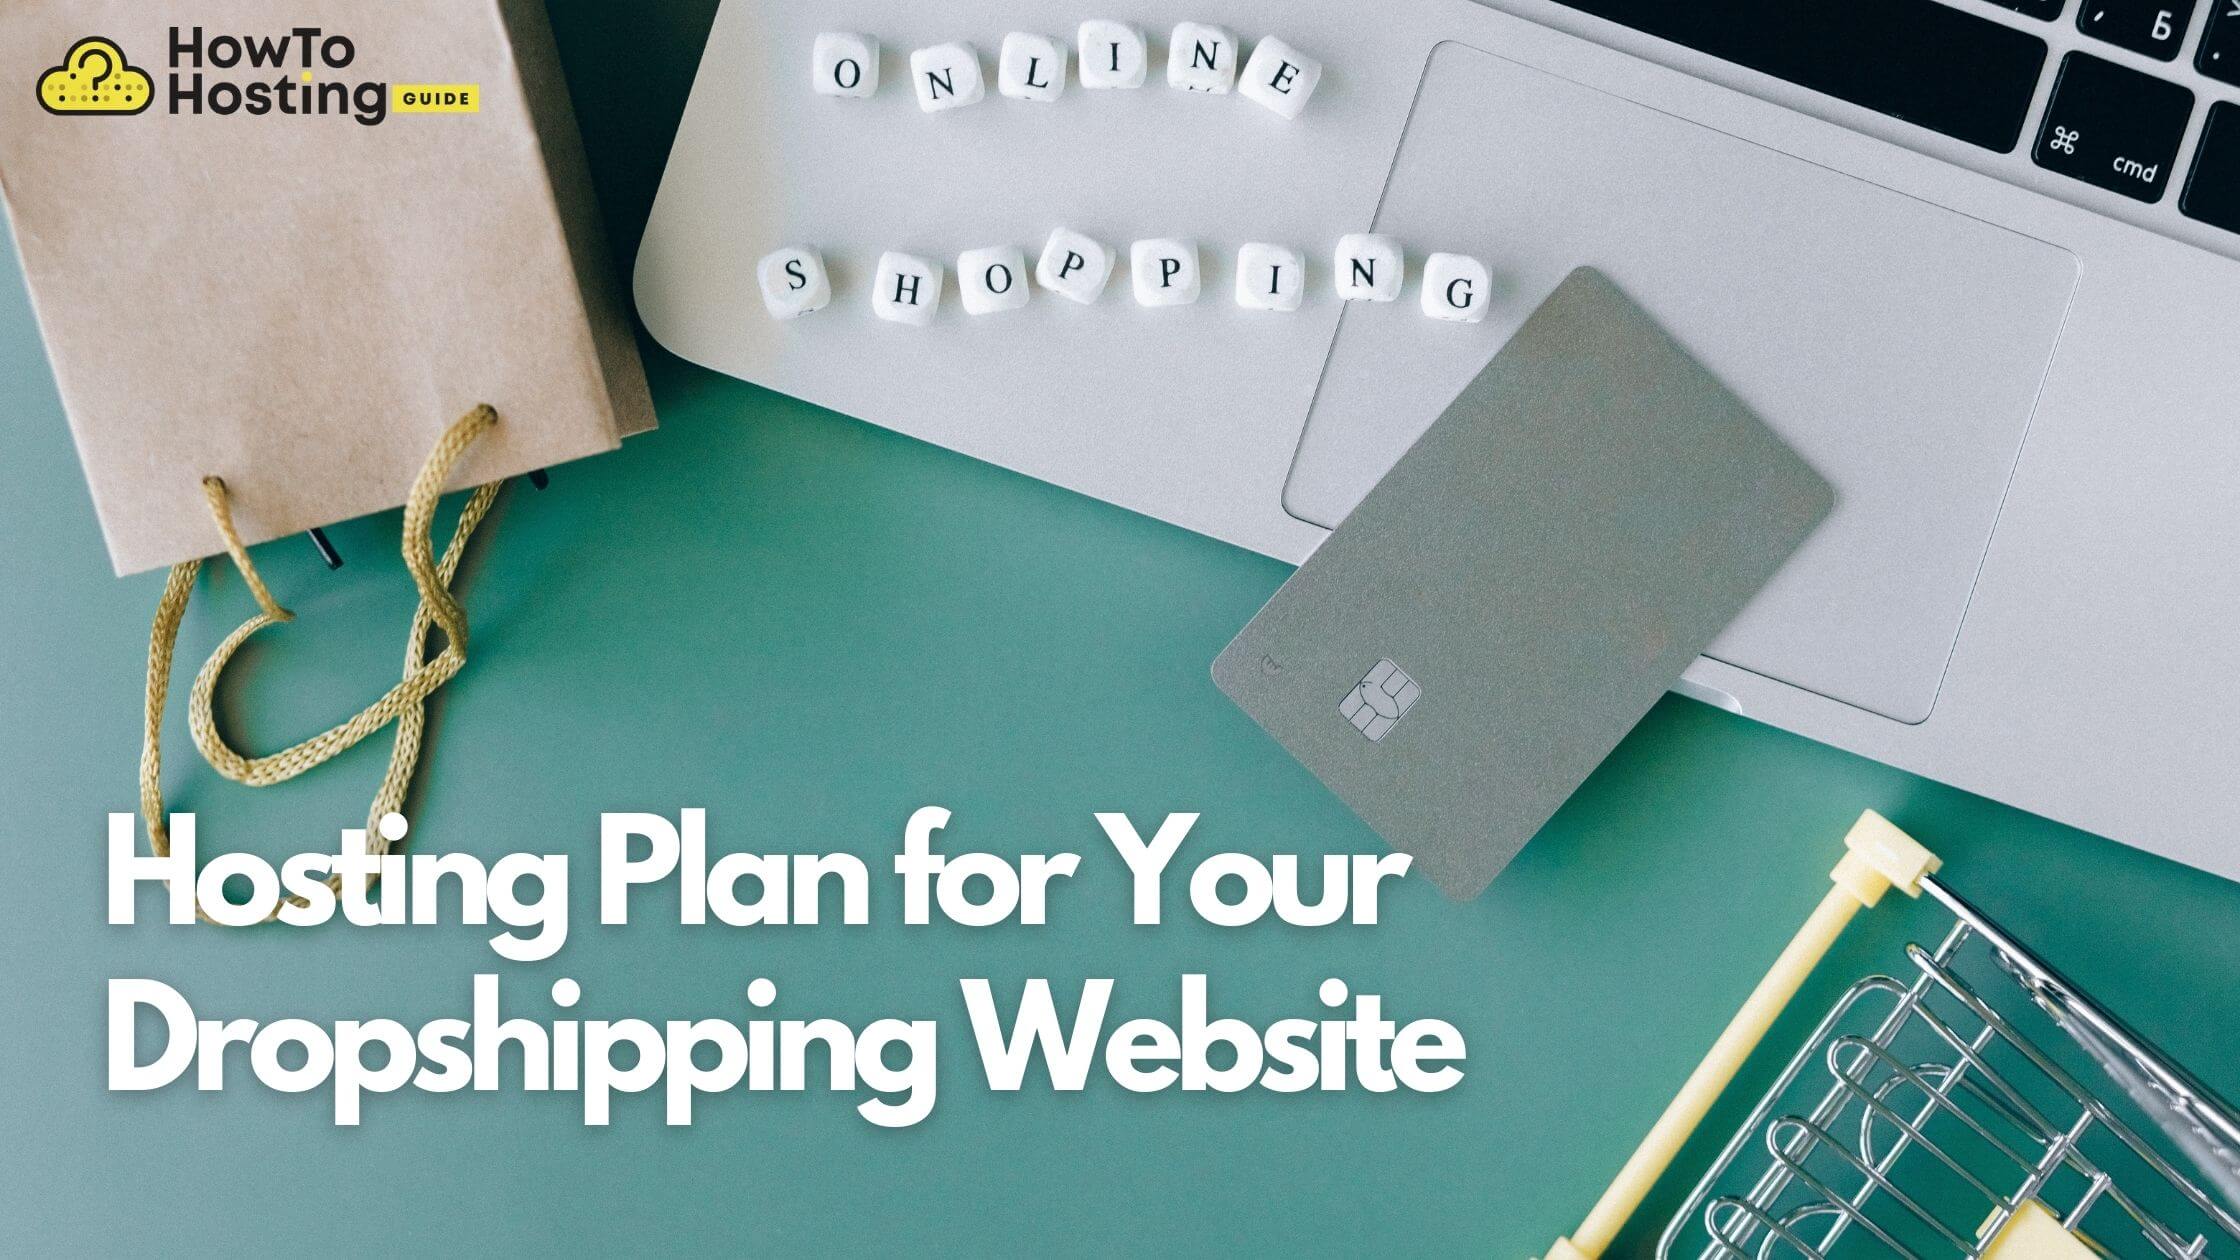 best hosting plan for your dropshipping website howtohosting guide